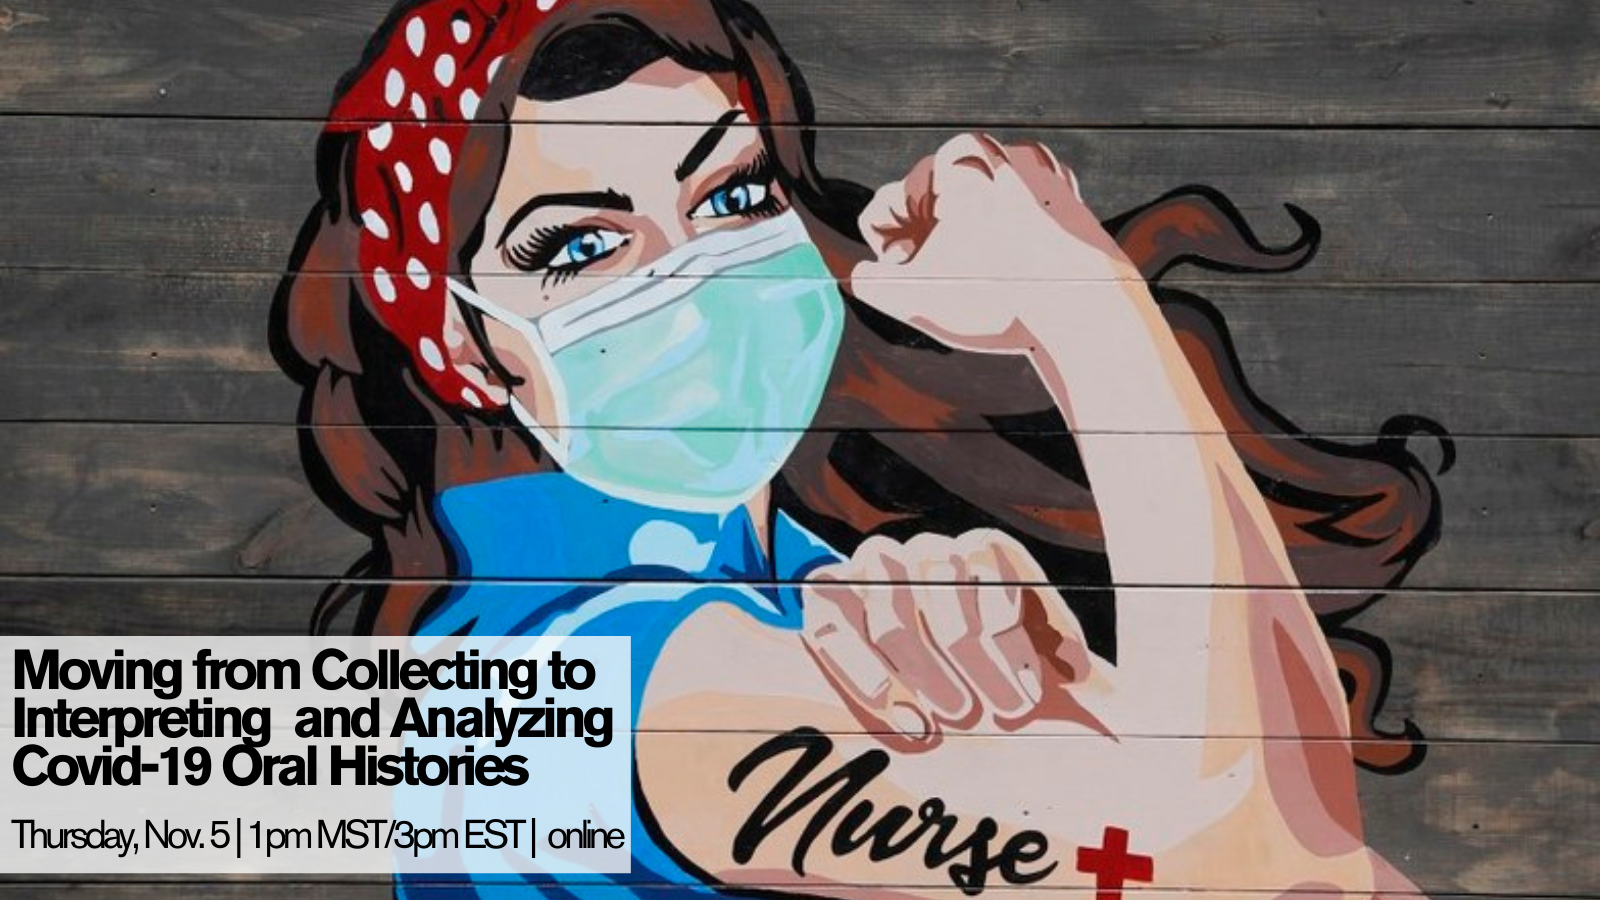 Photo of a painting of Rosie the Riviter with a mask on and a tattoo that says "nurse"